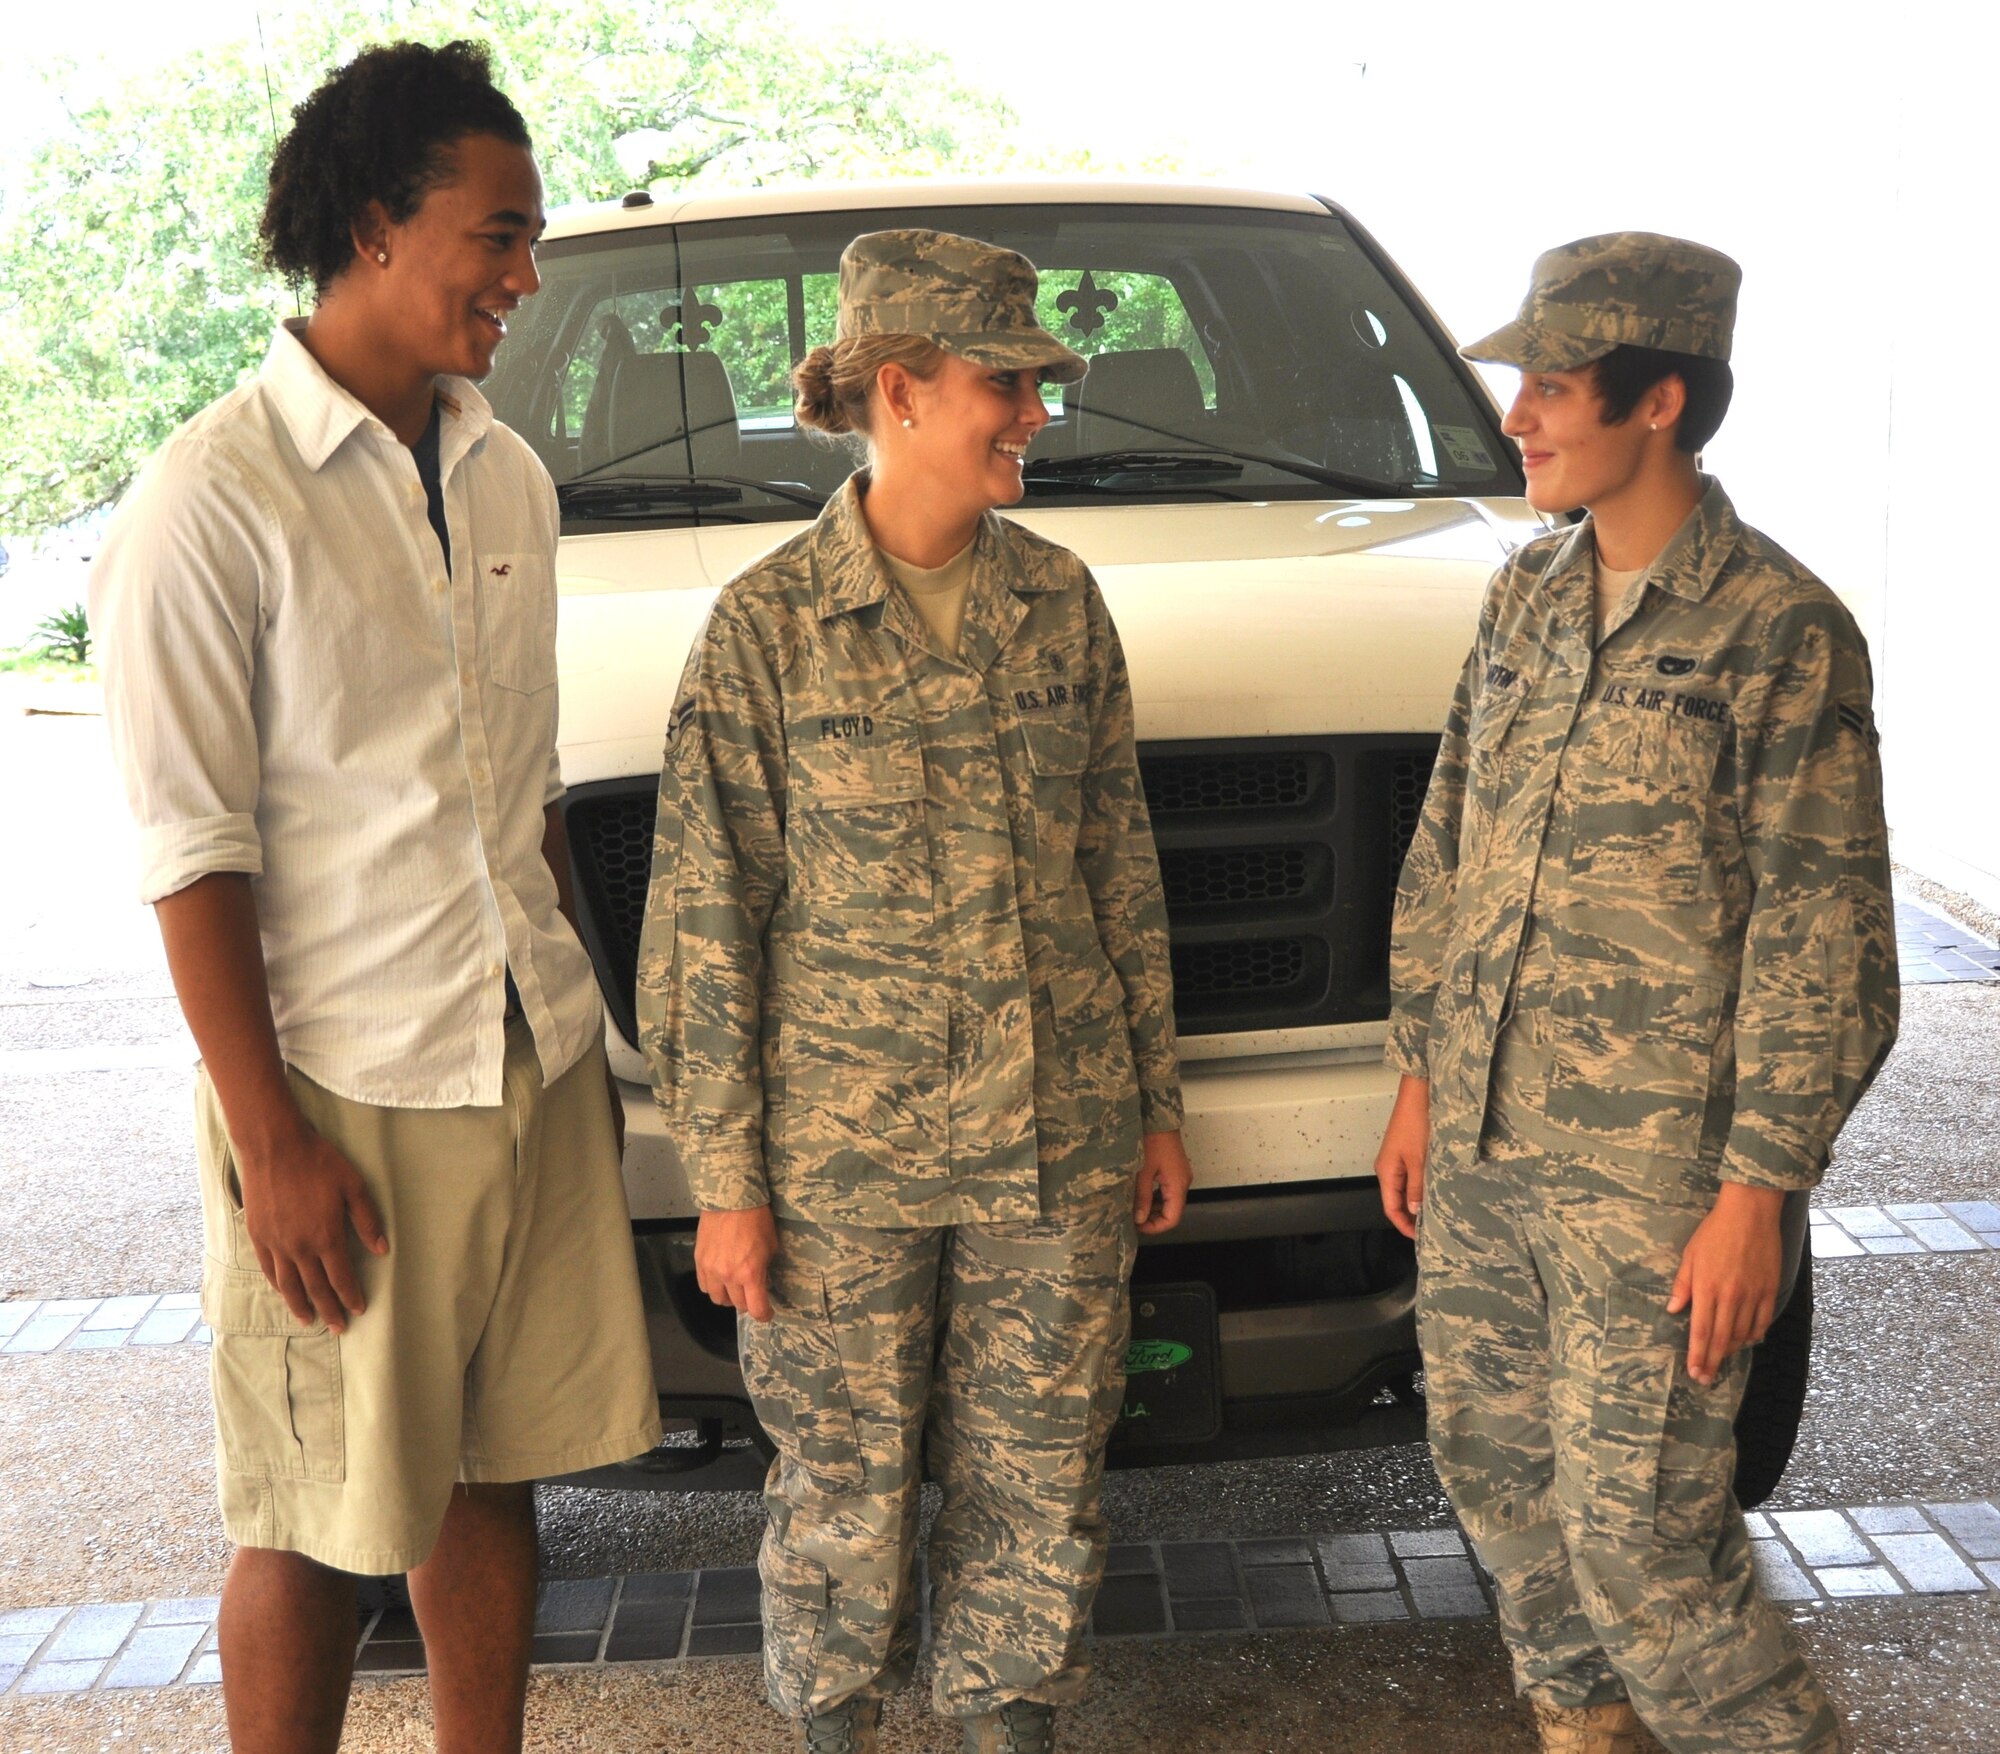 The Floyds and Airman Martin discuss the July 17 event in front of Airman Martin’s truck.  (U.S. Air Force photo by Steve Pivnick)